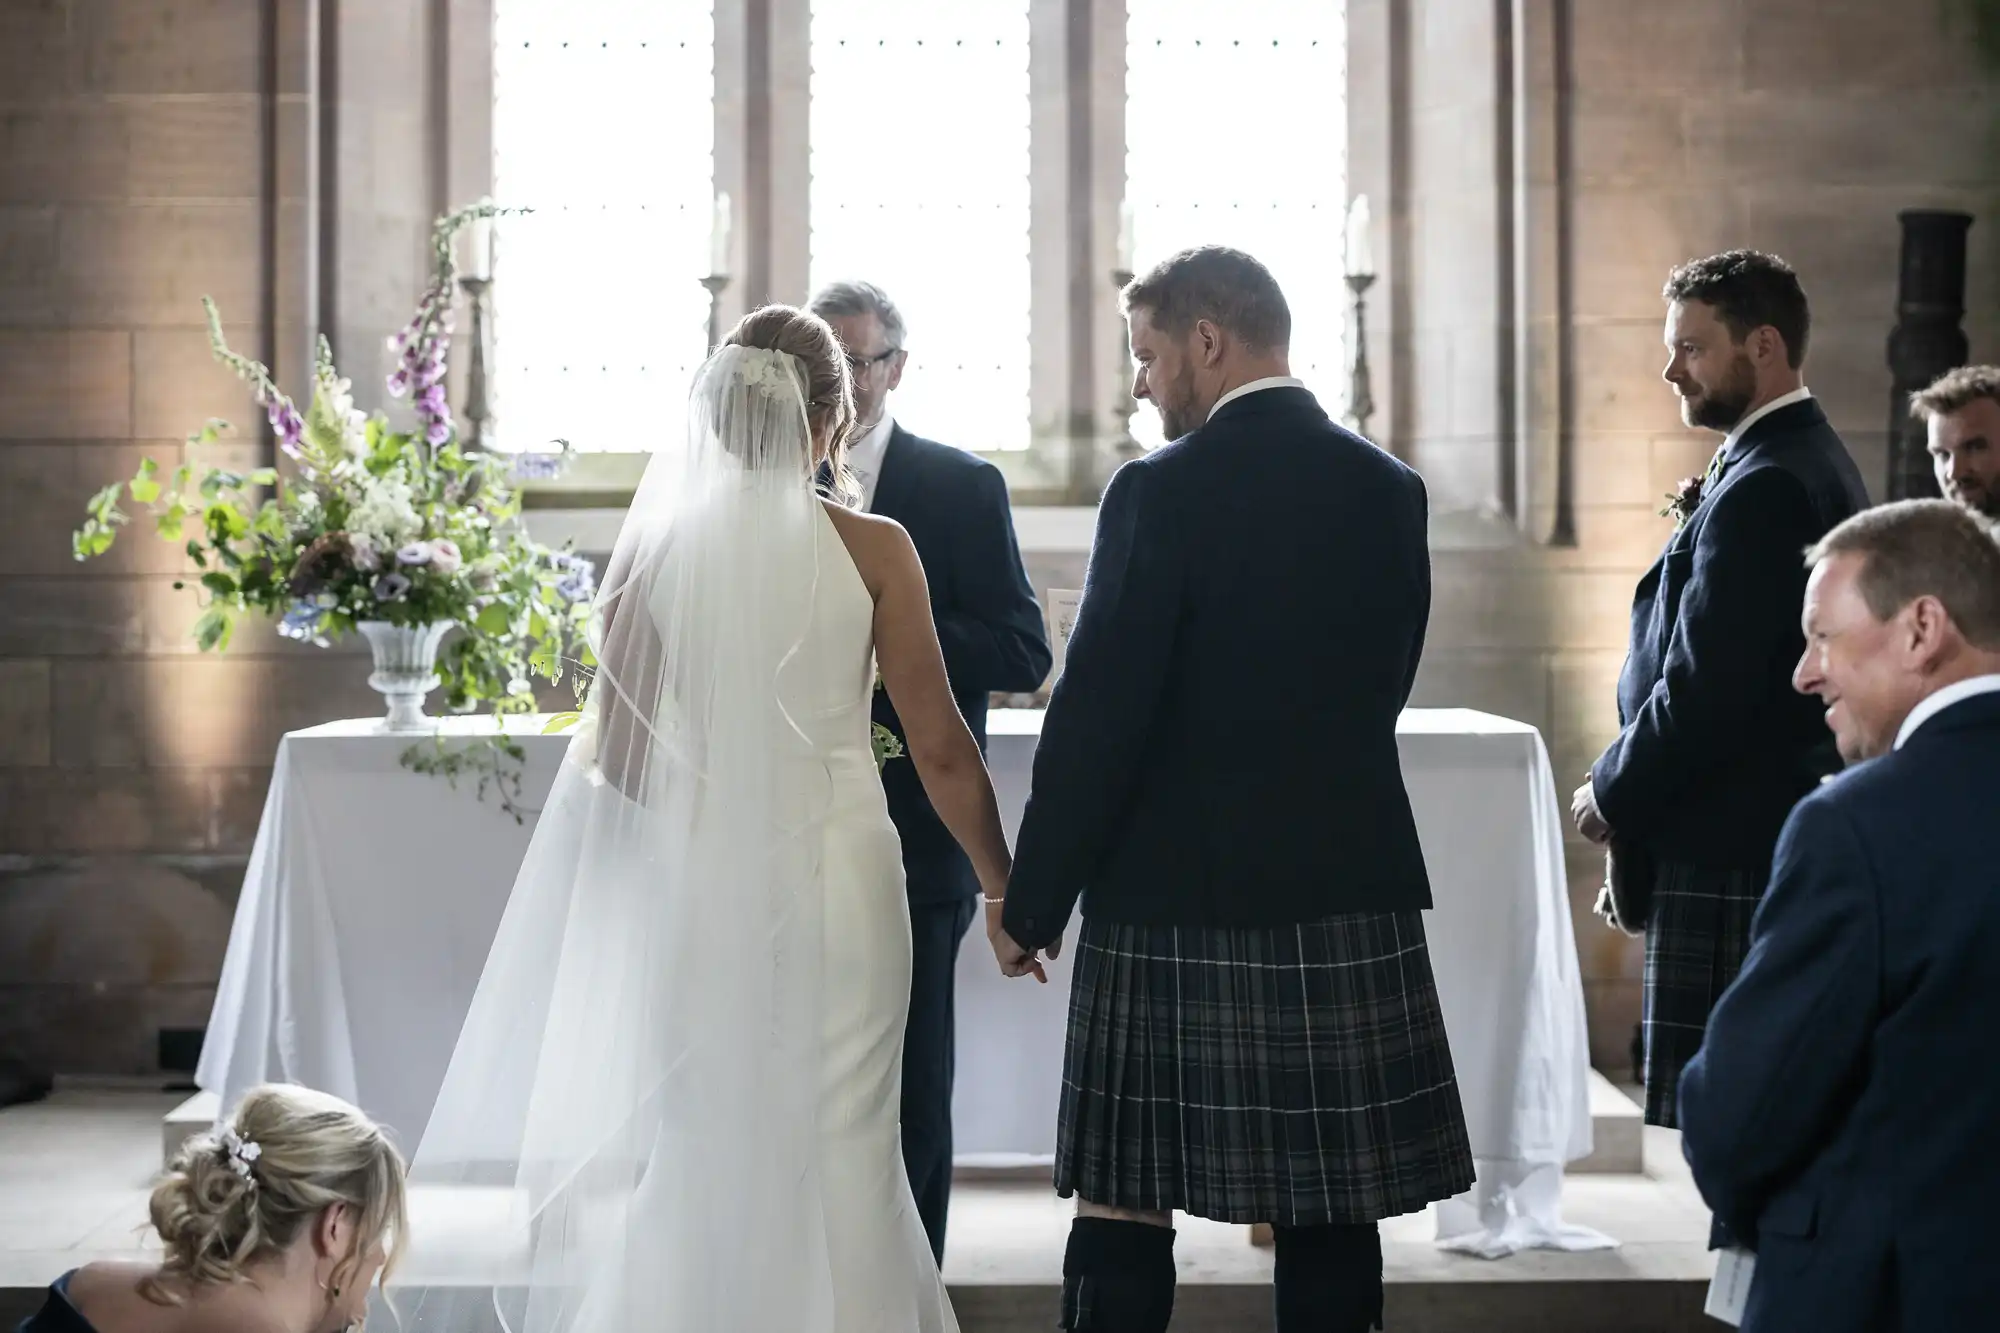 A bride and groom holding hands at the altar during a wedding ceremony, with the groom wearing a kilt.